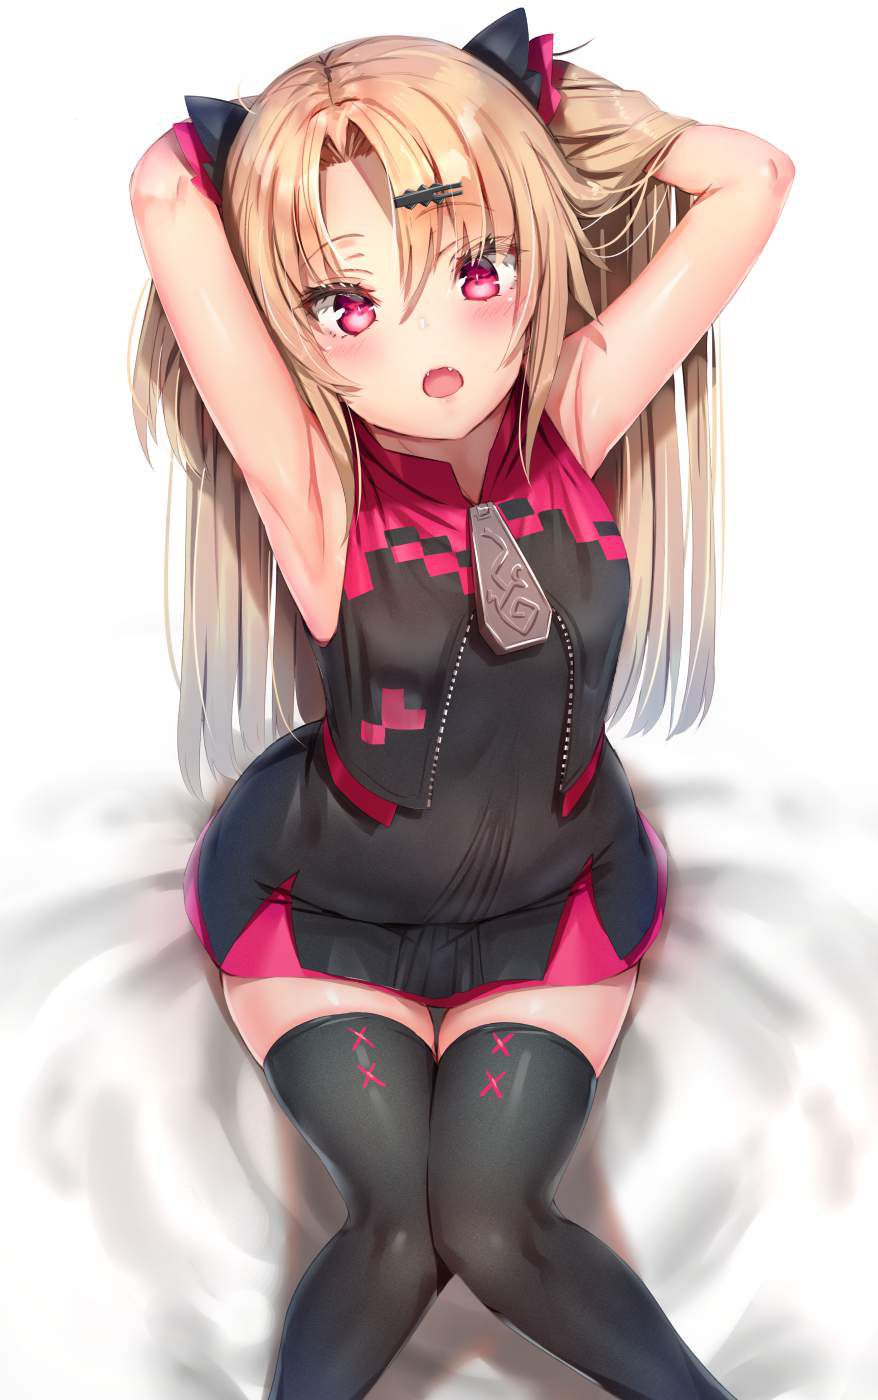 No waiting for erotic images of virtual YouTubers! 10